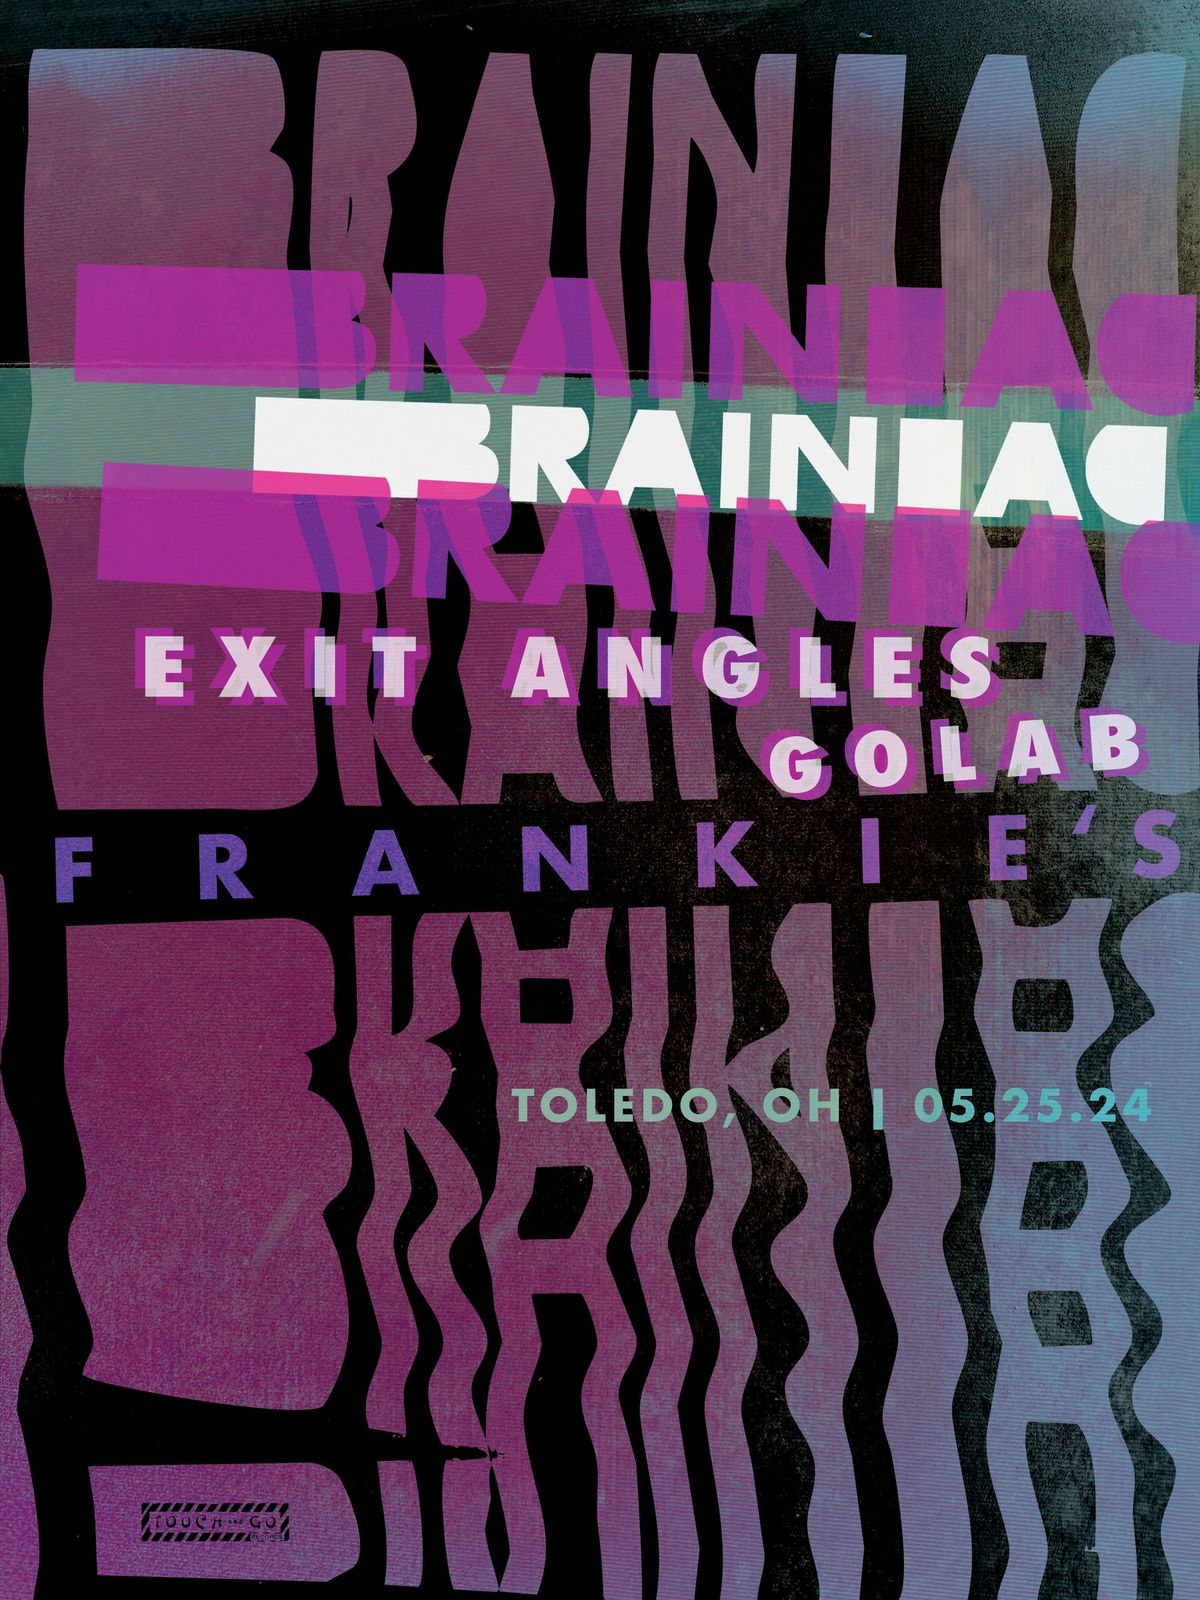 Brainiac wsg Exit Angles & goLab LIVE at Frankies Sat May 25th at 7pm